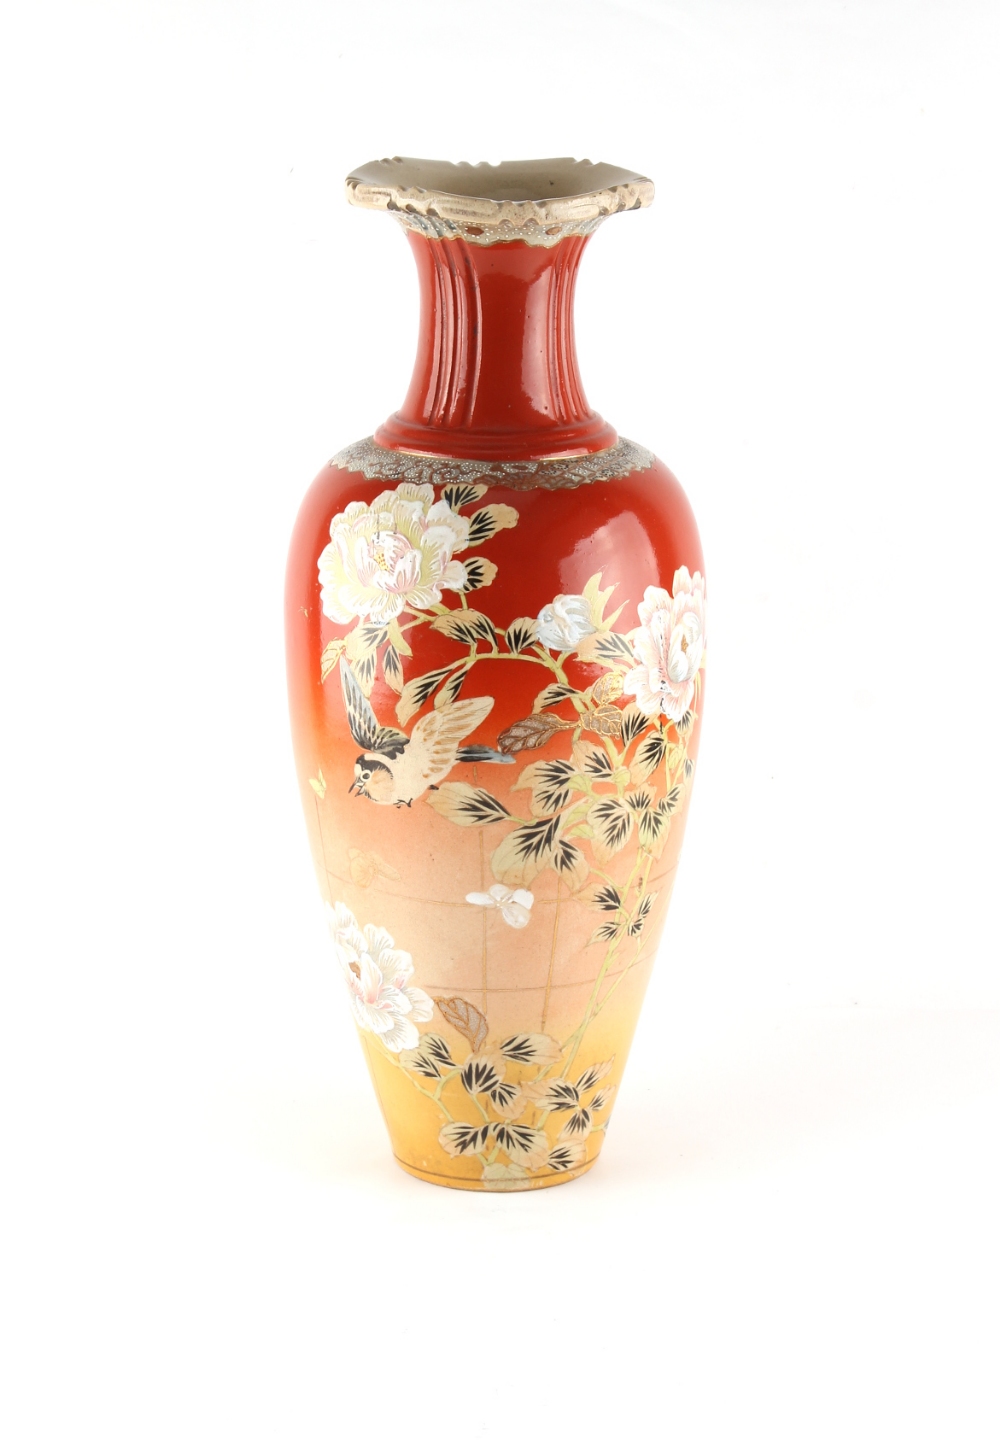 Property of a lady - an early 20th century Japanese Satsuma vase, 18.3ins. (46.5cms.) high.